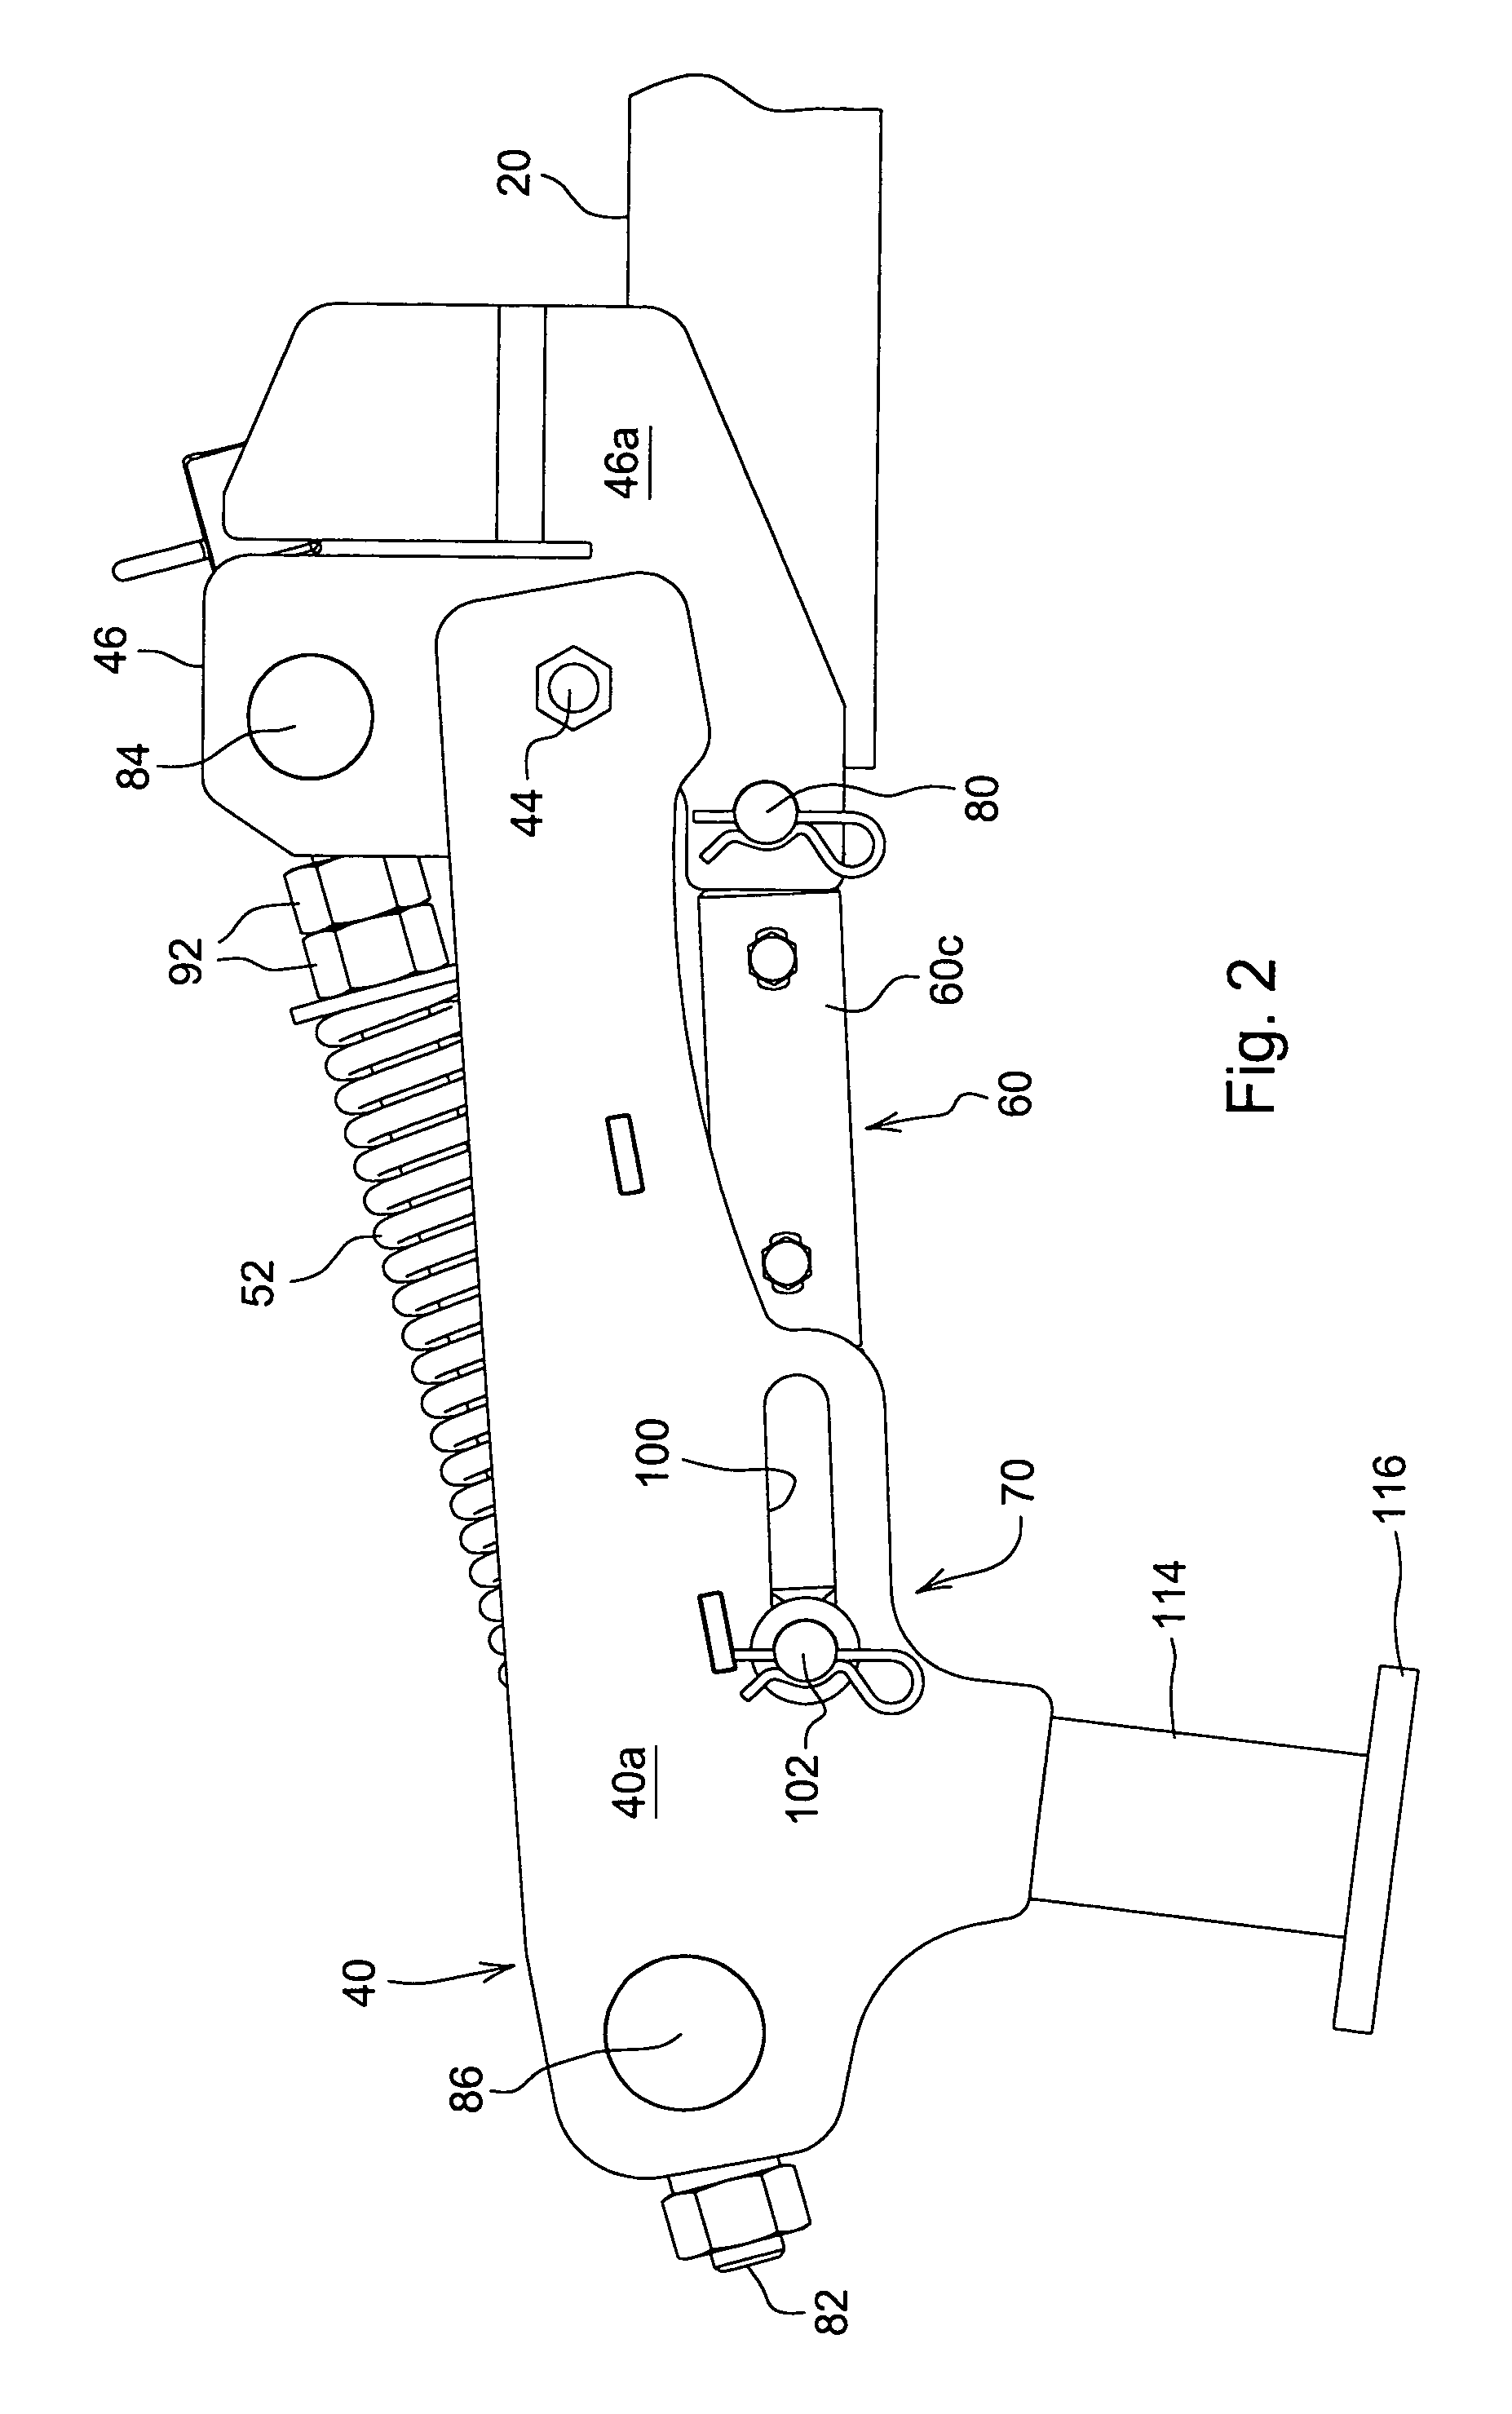 Hydraulic lift rolling basket structure for a tillage implement